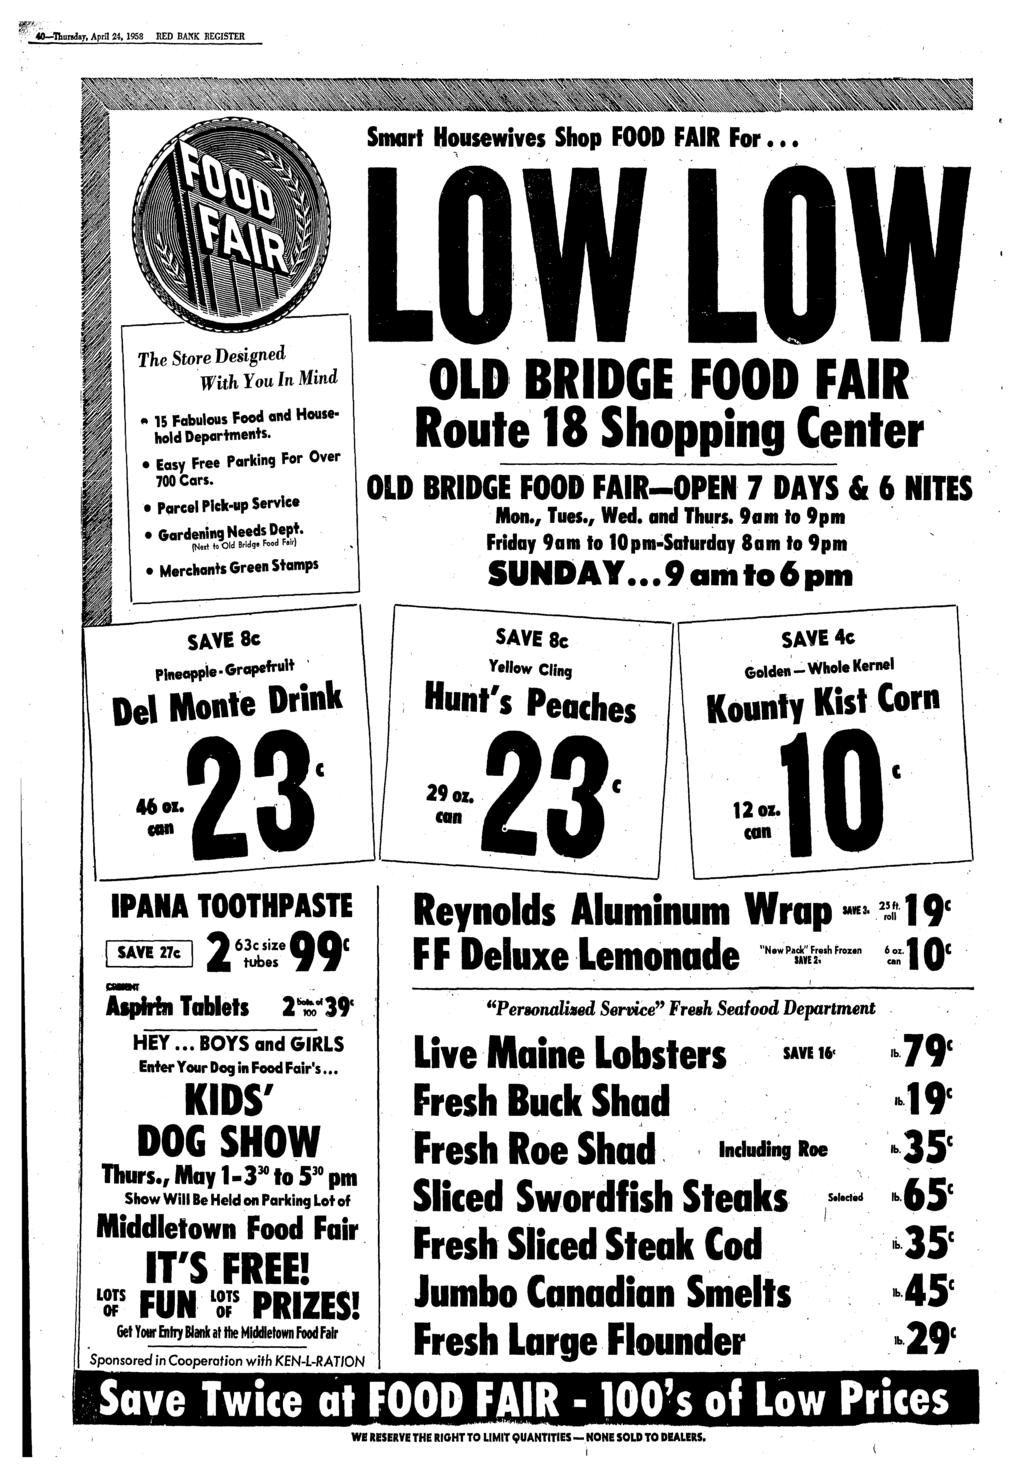 , April 24, 1958 REGISTER Smart Housewives Shop FOOD FAIR For... The Store Designed With You In Mind m 15 Fabulous Food and Household Departments. Easy Free Parking For Over 700 Cars.